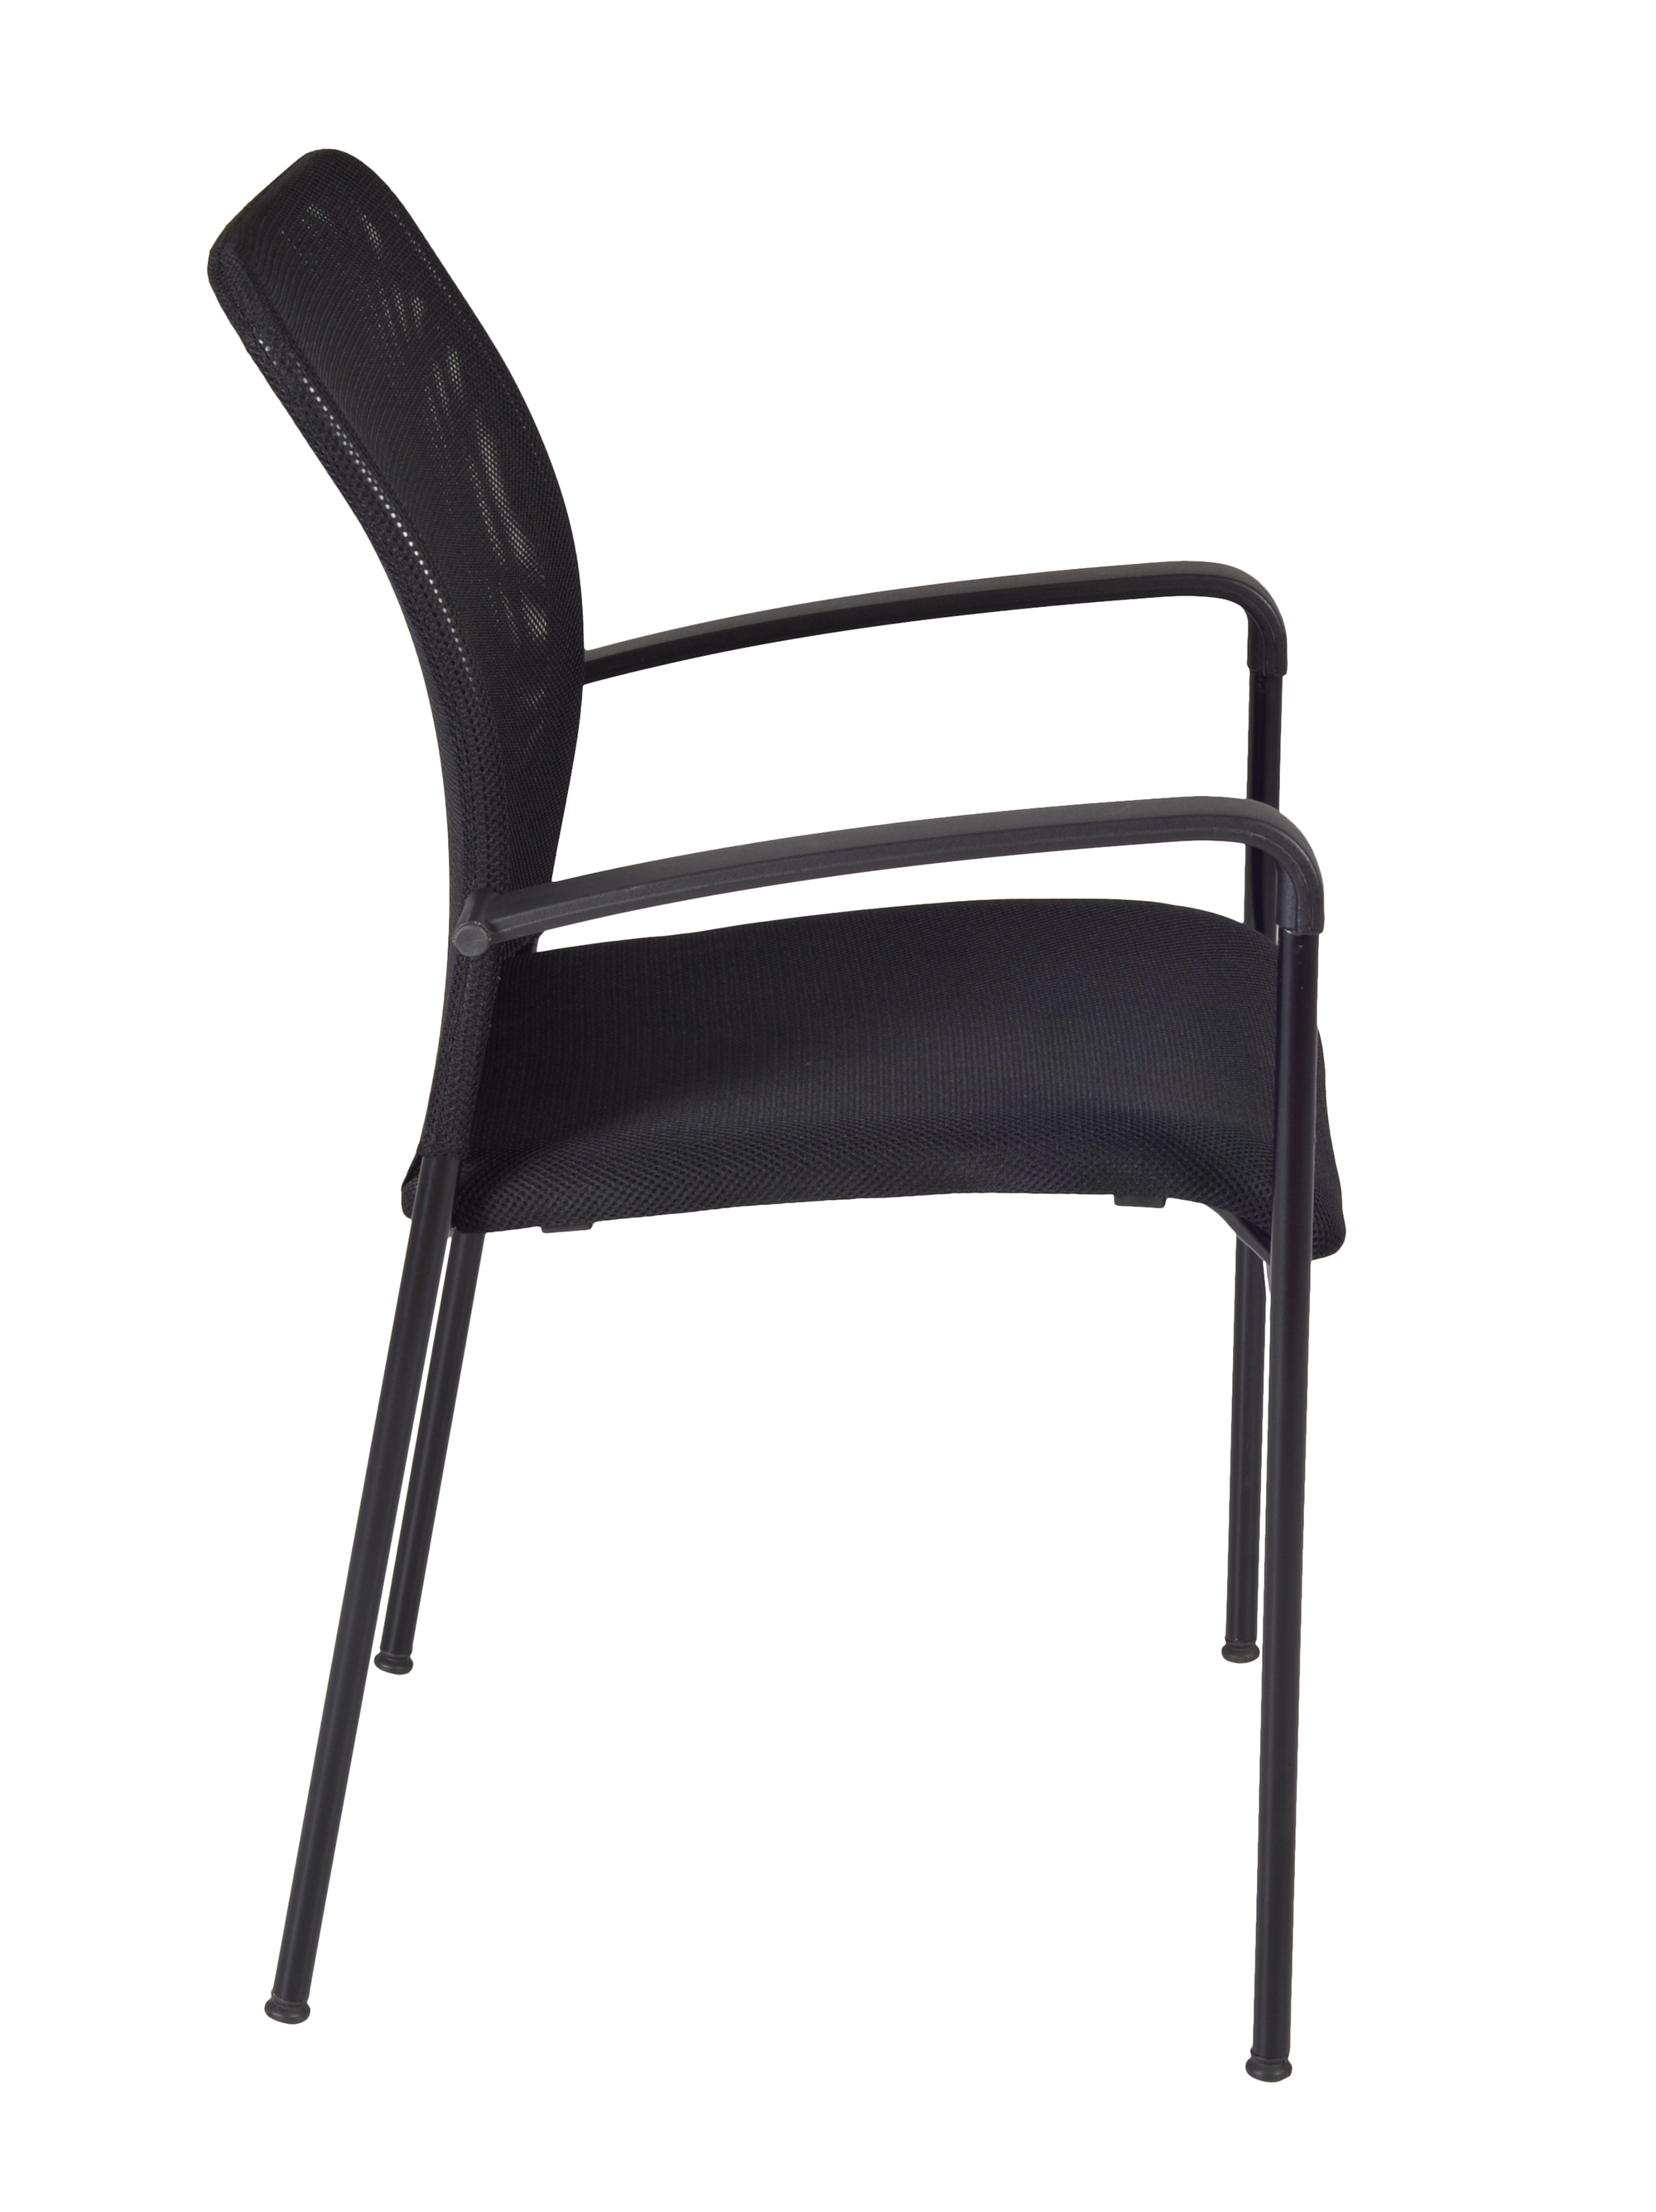 Mario Stack Chair (24 pack)- Black - image 3 of 4